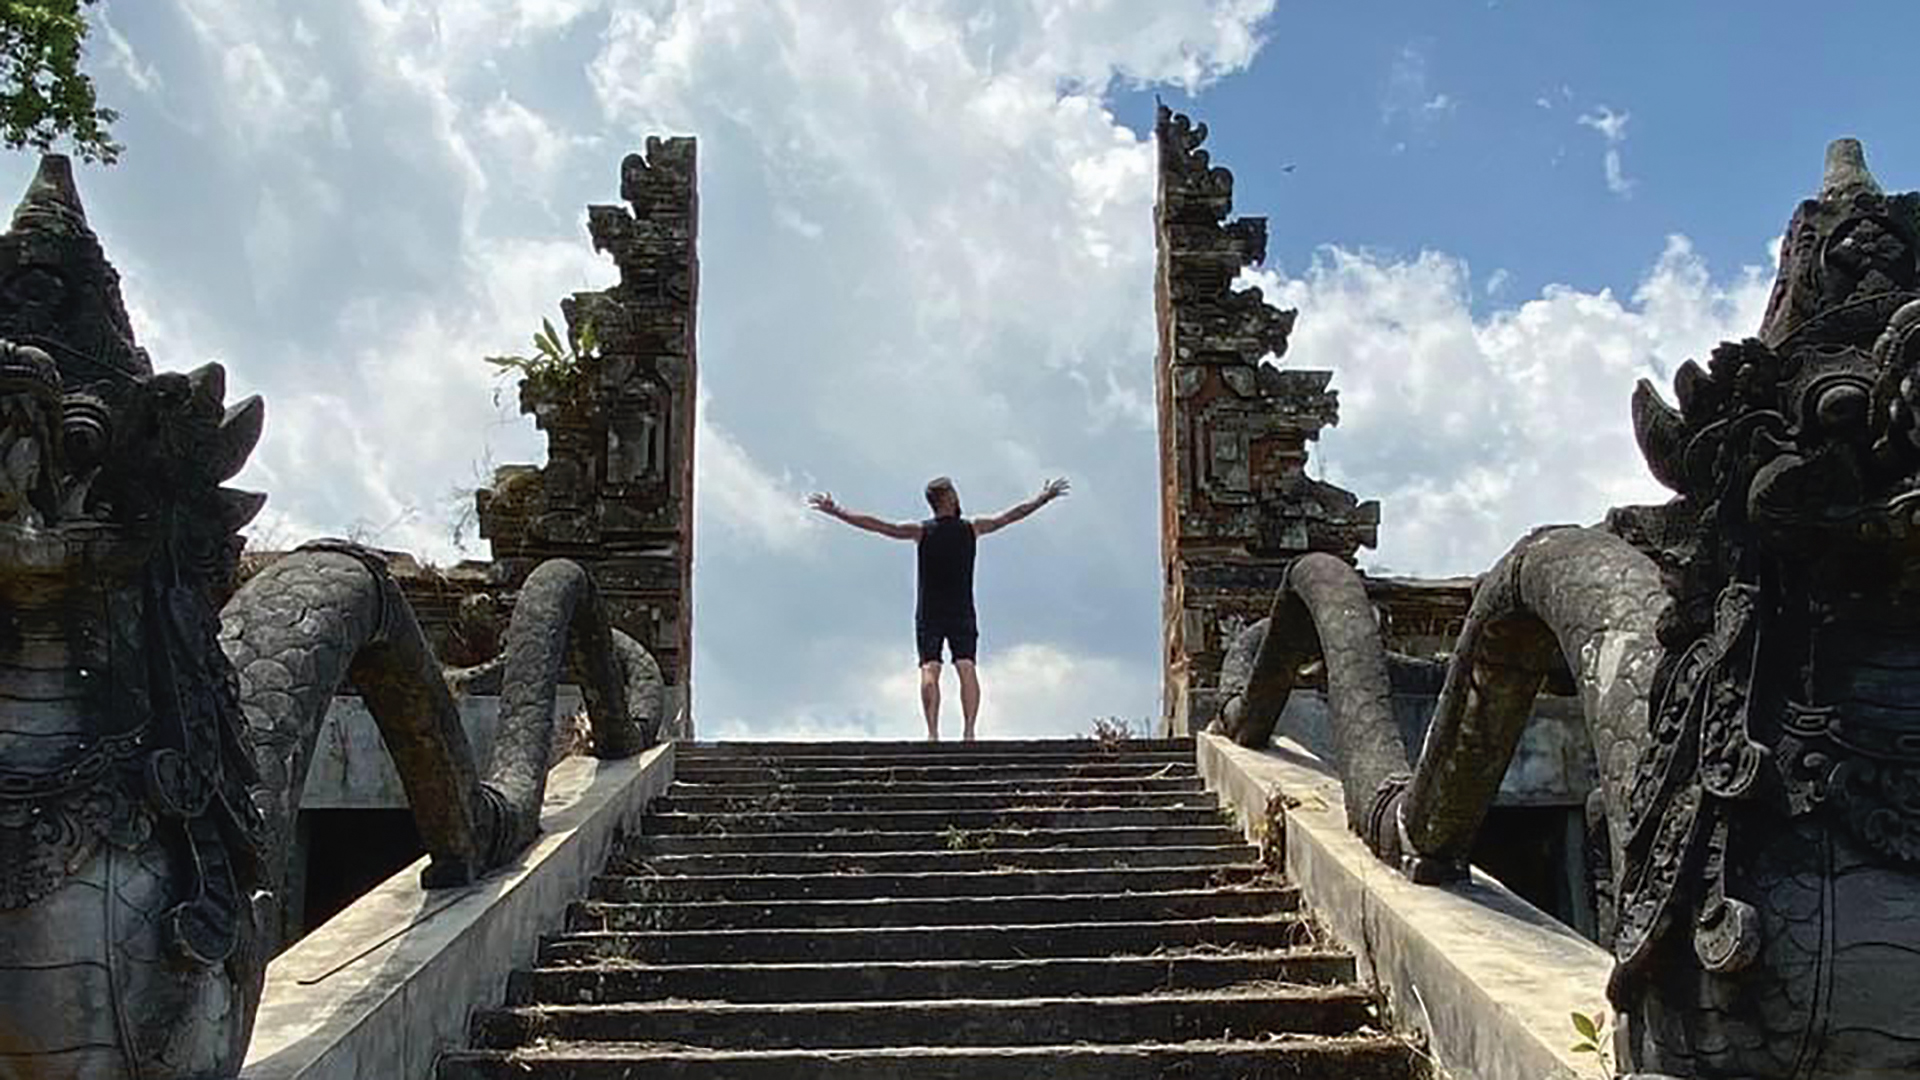 The Bearded Explorer at the top of some stairs with arms raised